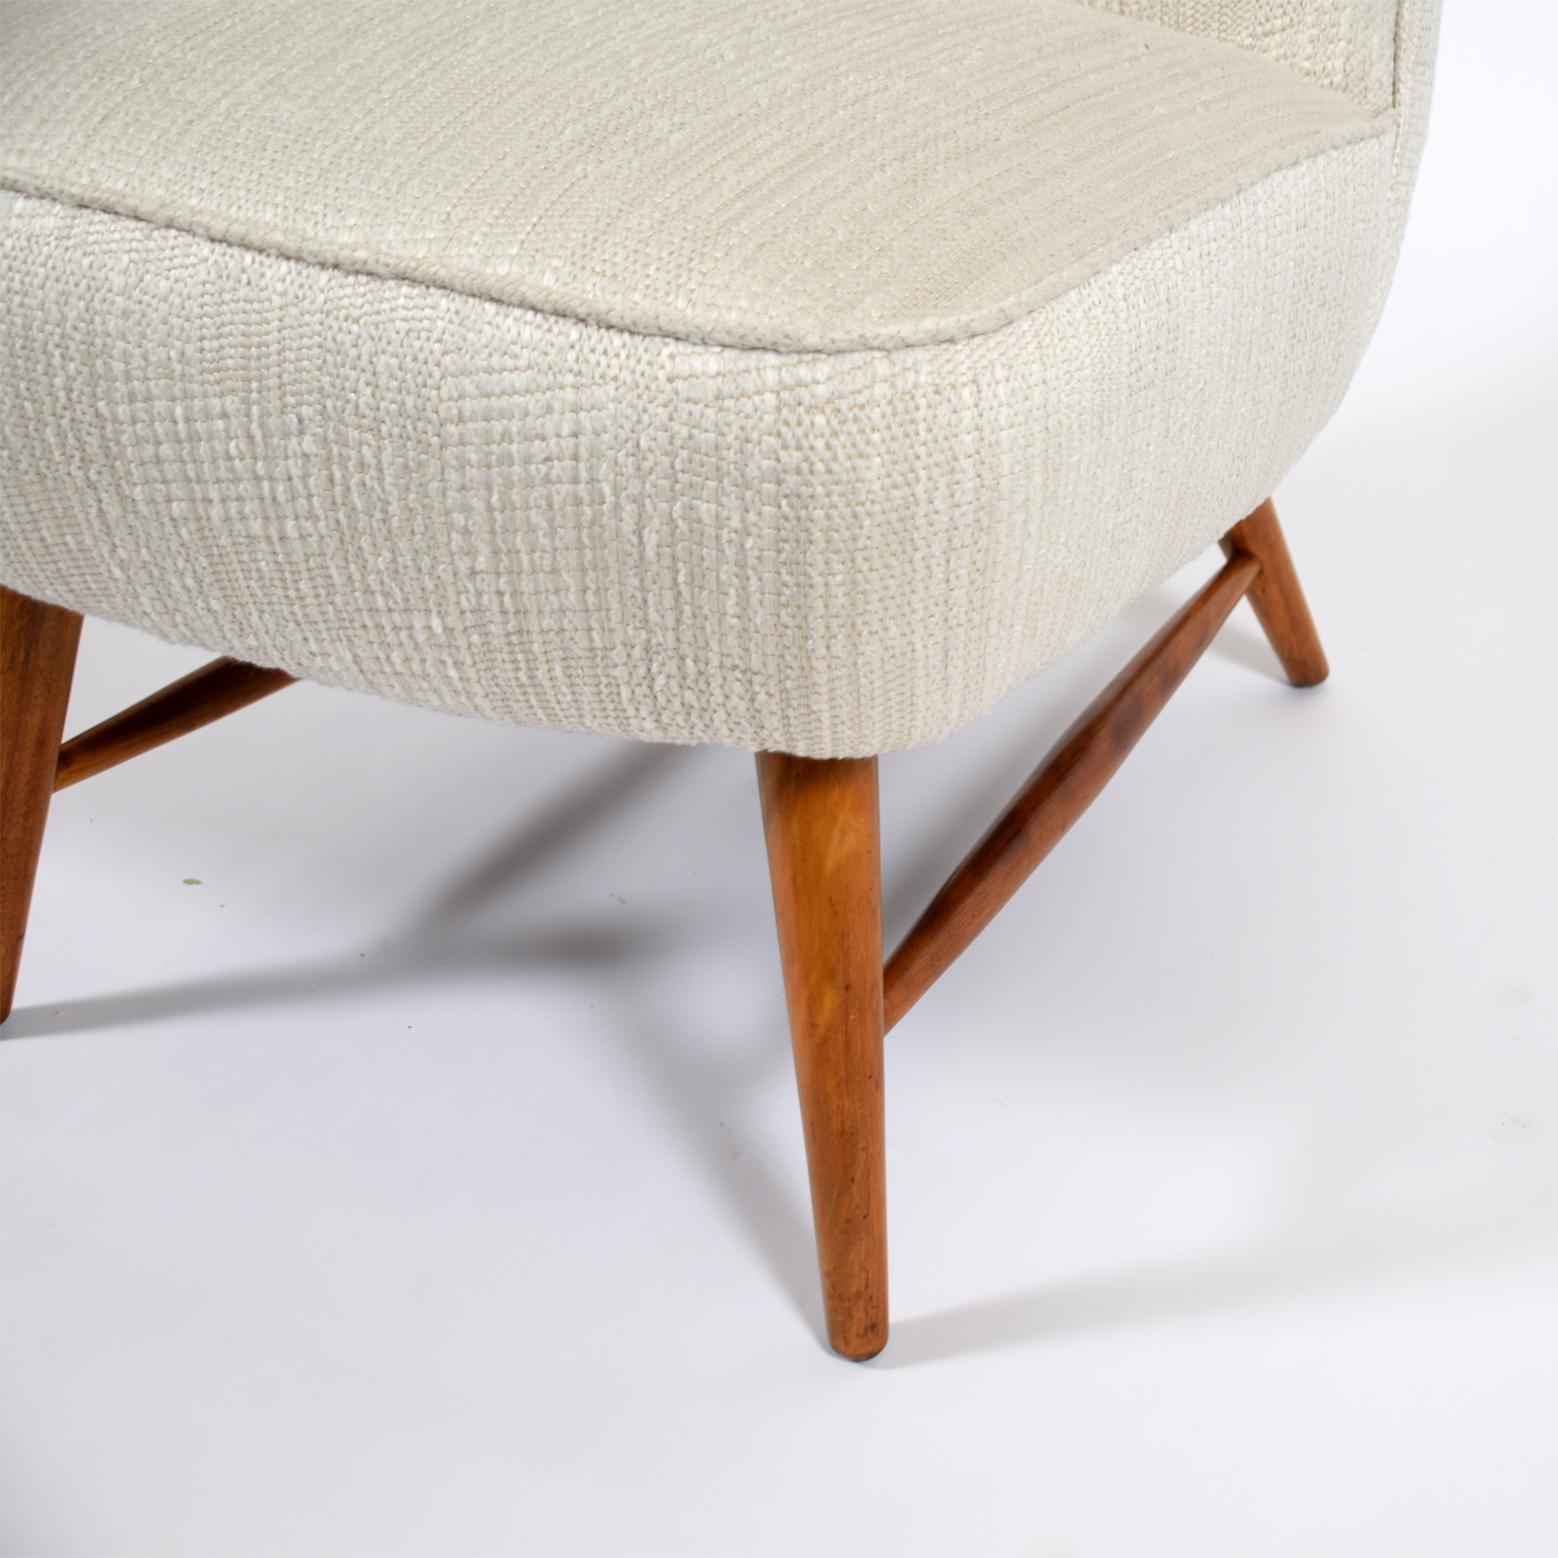 Mid-20th Century Easy Chair by Elias Svedberg 1940's For Sale